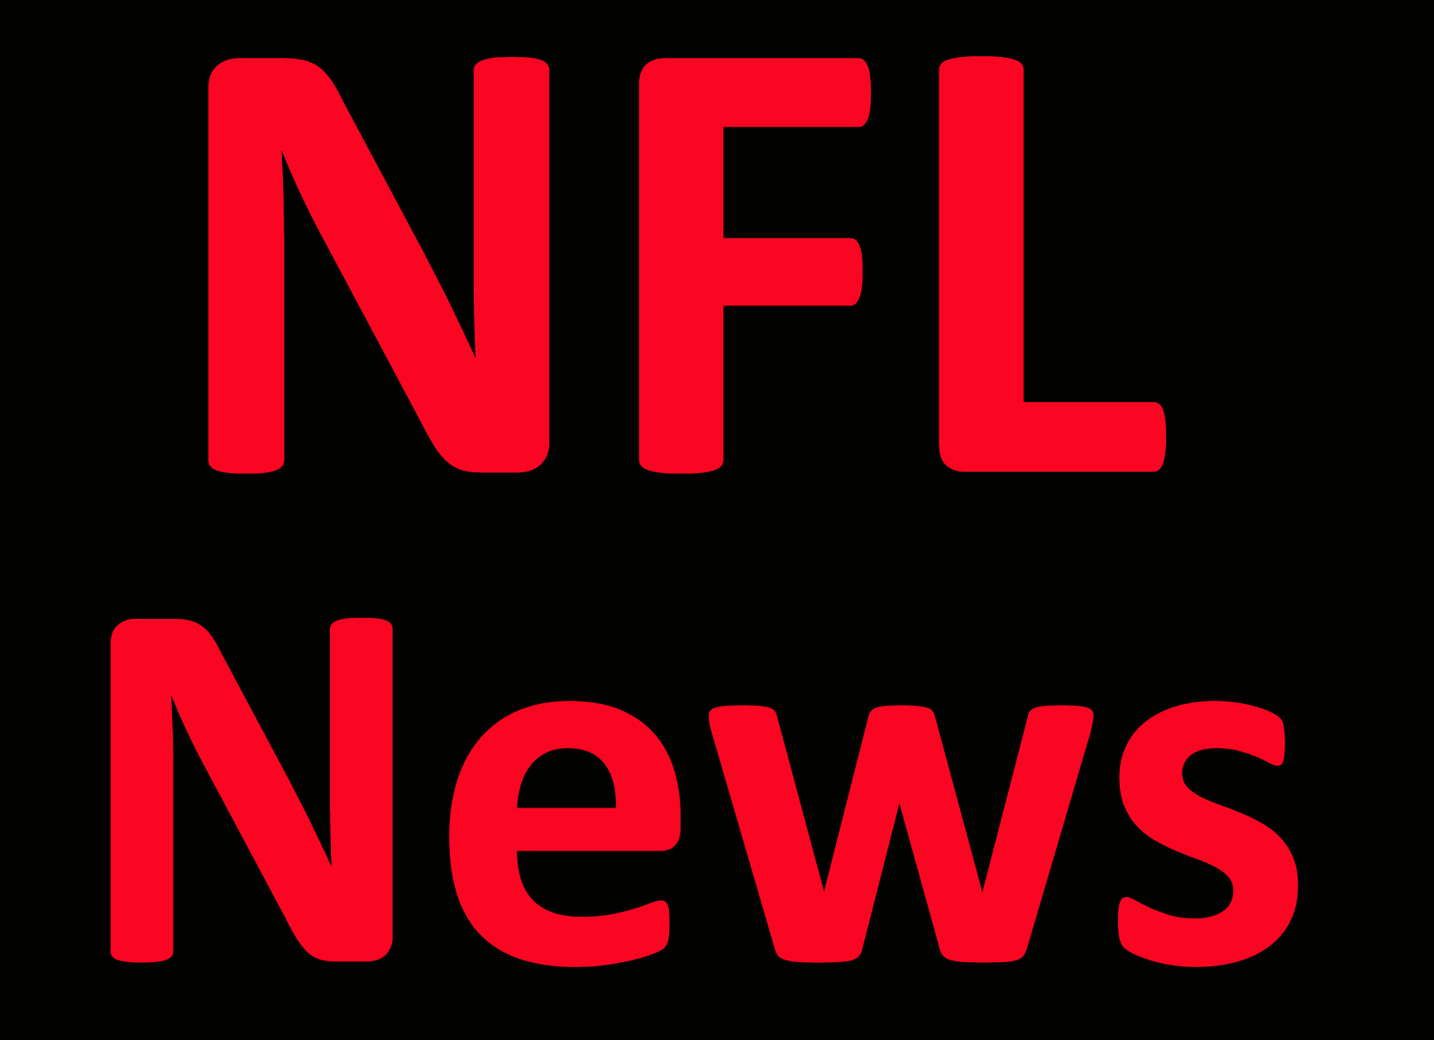 NFL News: The NFL cracked down on taunting, but it might not last: Everything we know so far Per Report